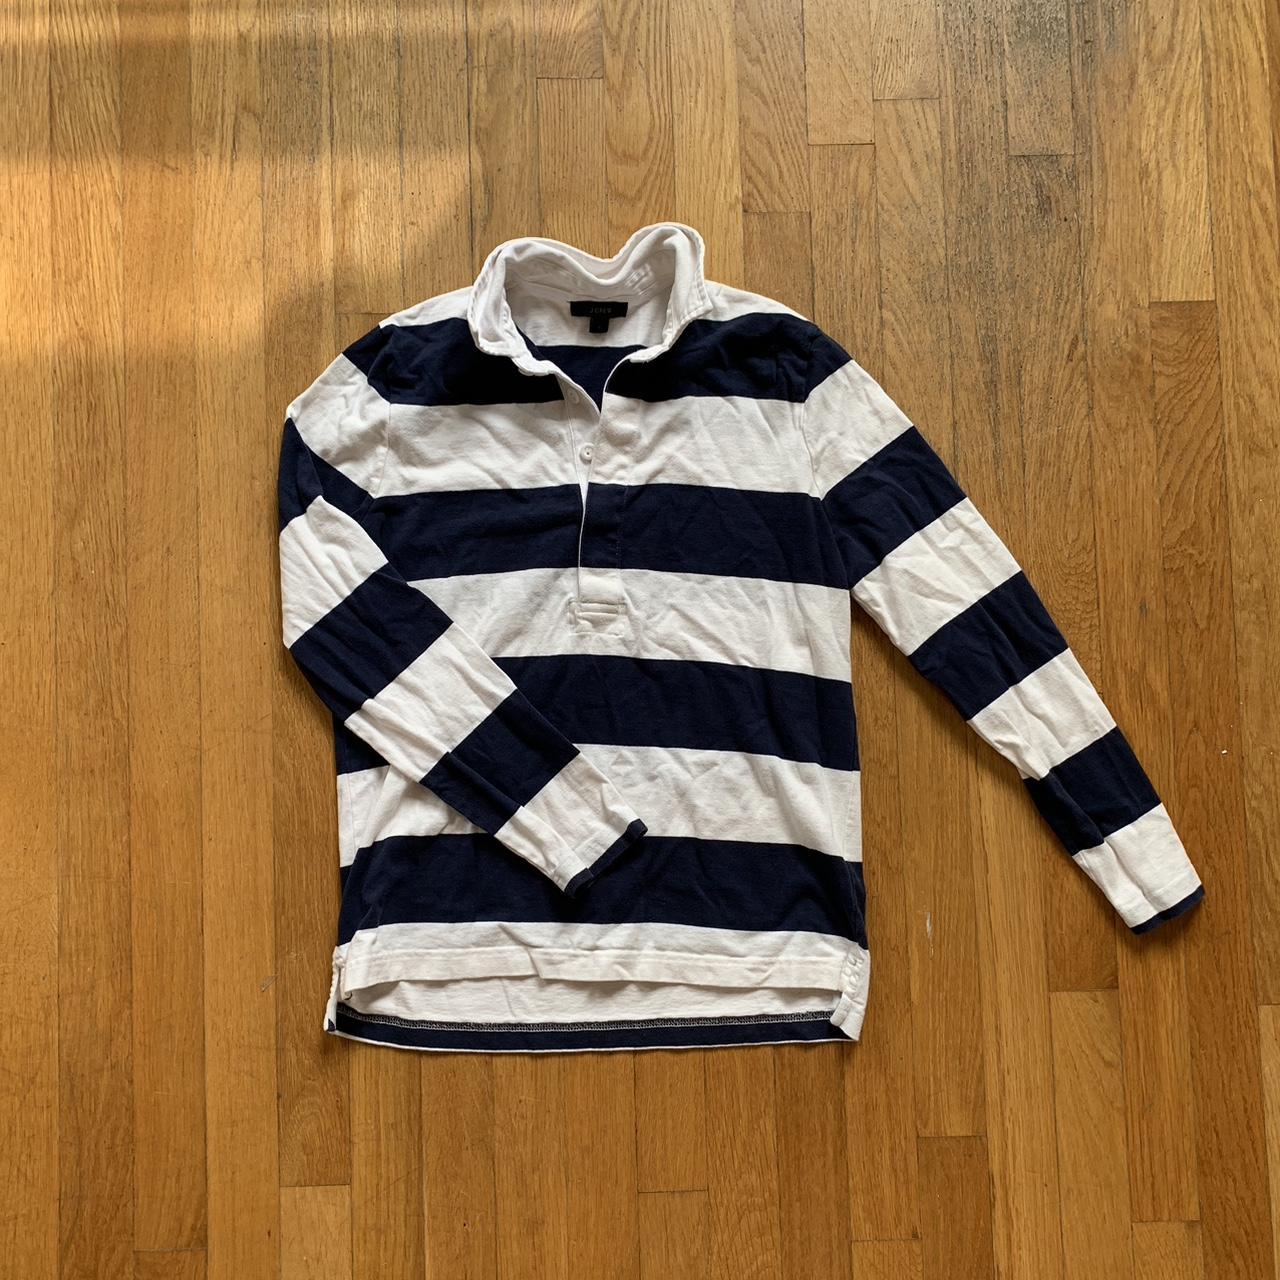 Navy blue and white striped rugby top - Depop